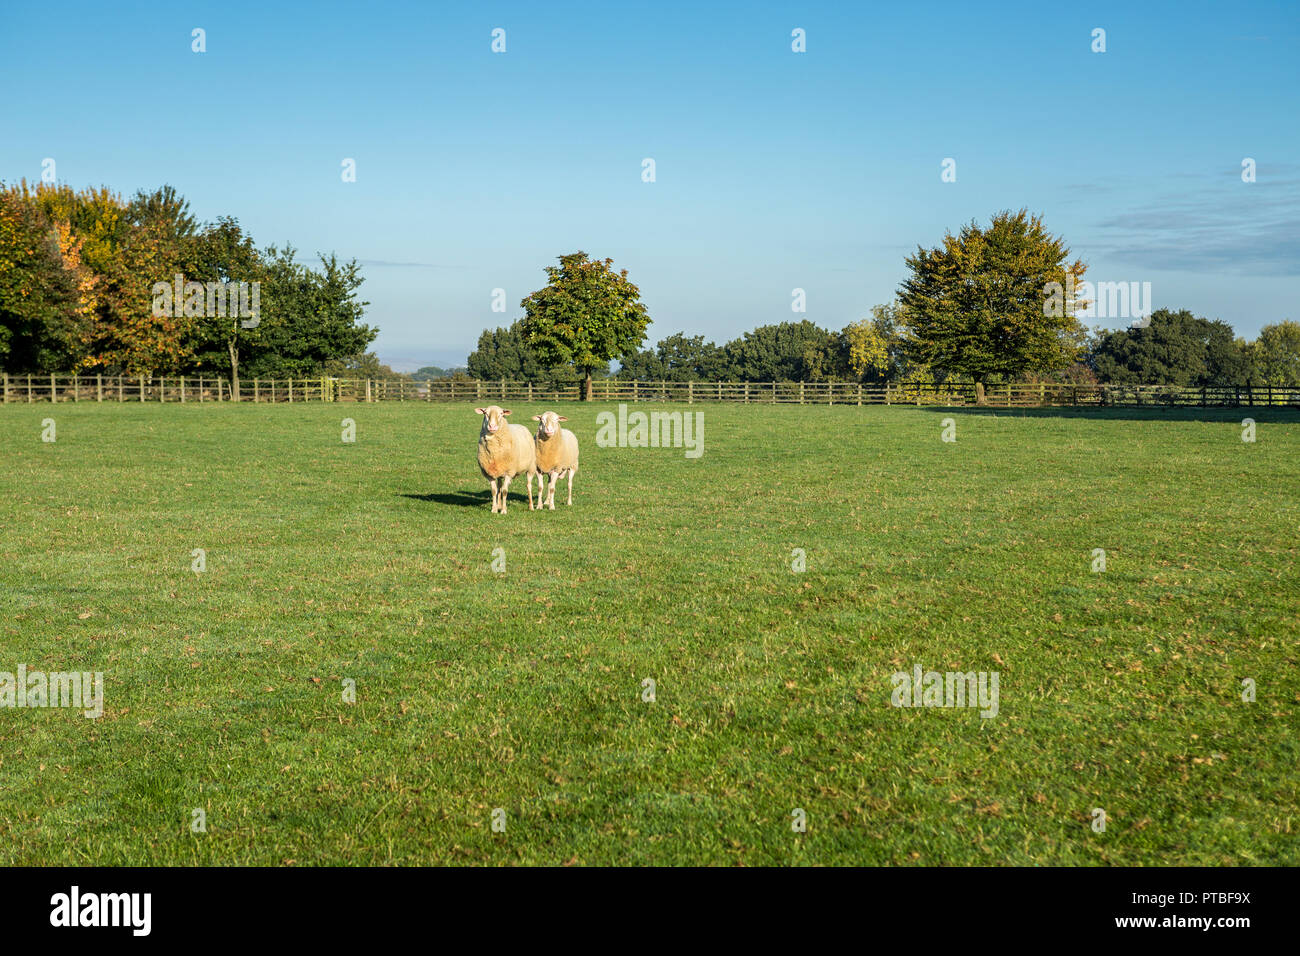 Two sheep standing together in the middle of a green farm field, England, UK Stock Photo